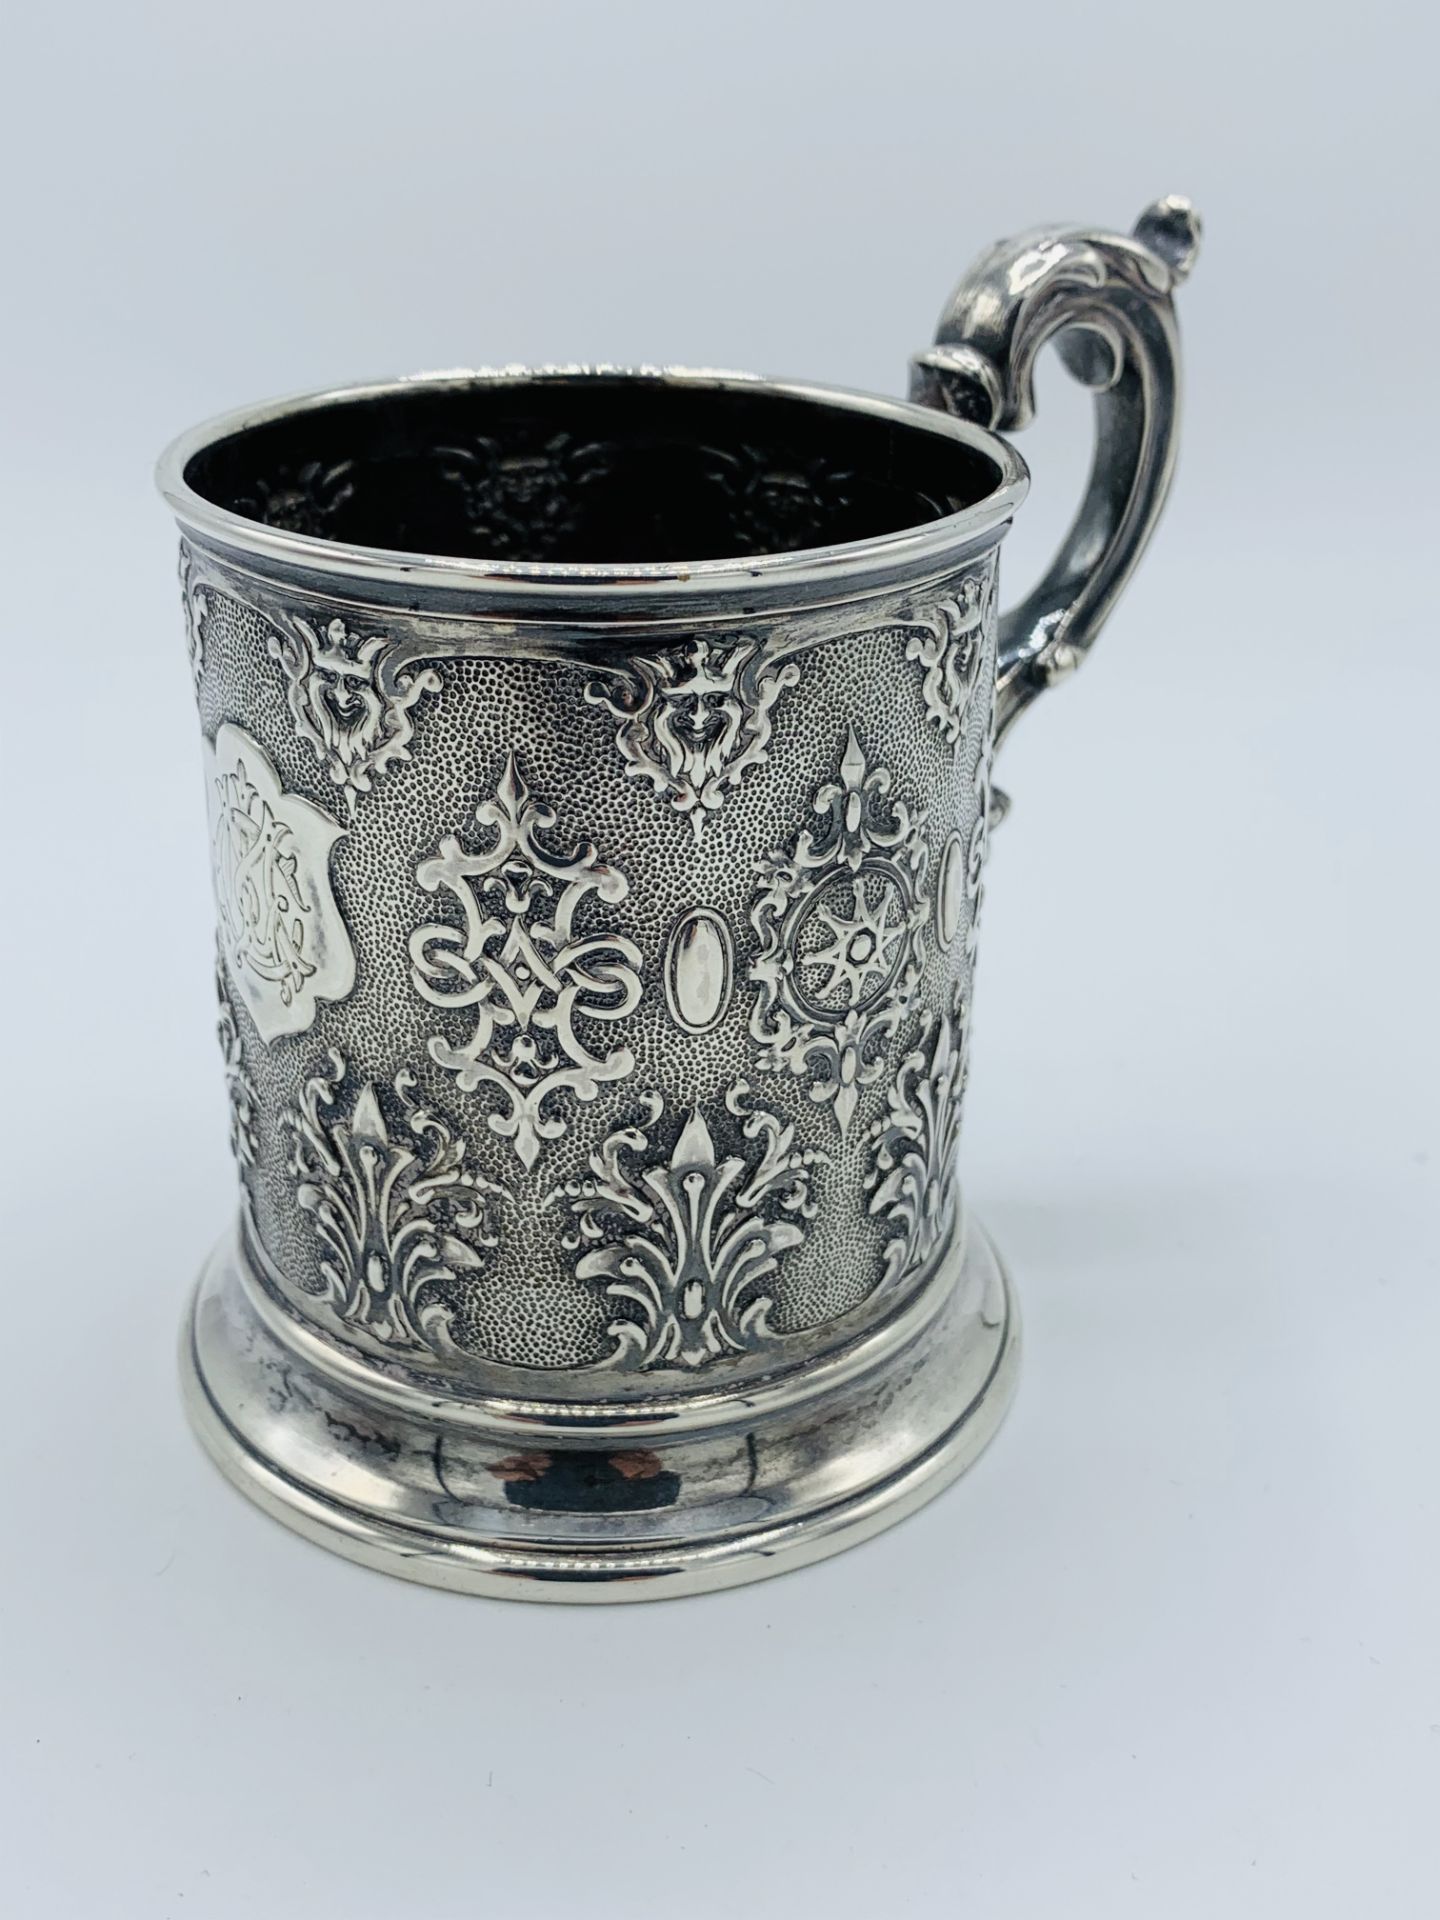 Small heavily repousse decorated silver tankard by Robert Hennell III - Image 3 of 3